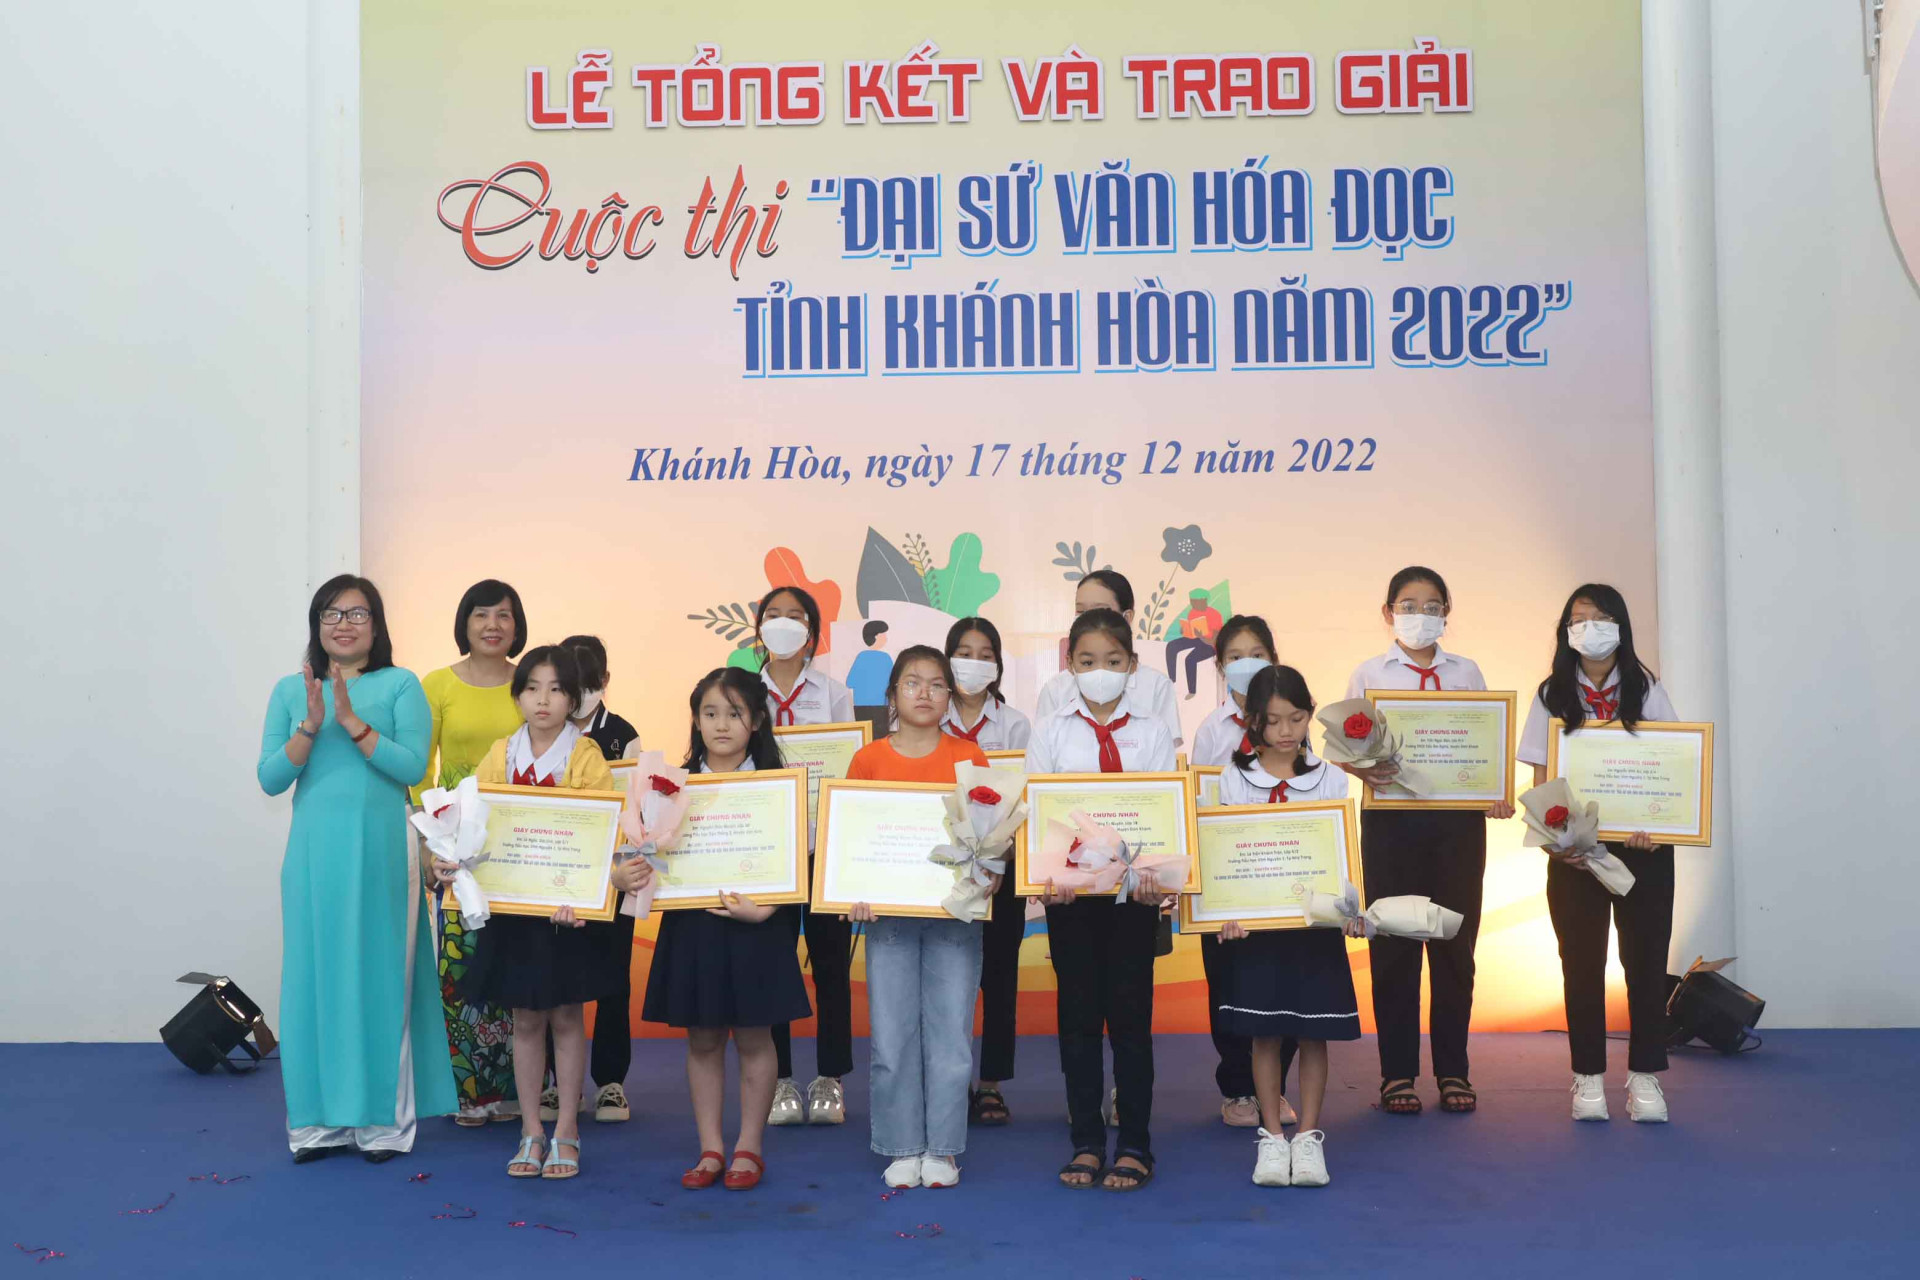 Leadership of Khanh Hoa Museum offering consolation prizes to pupils